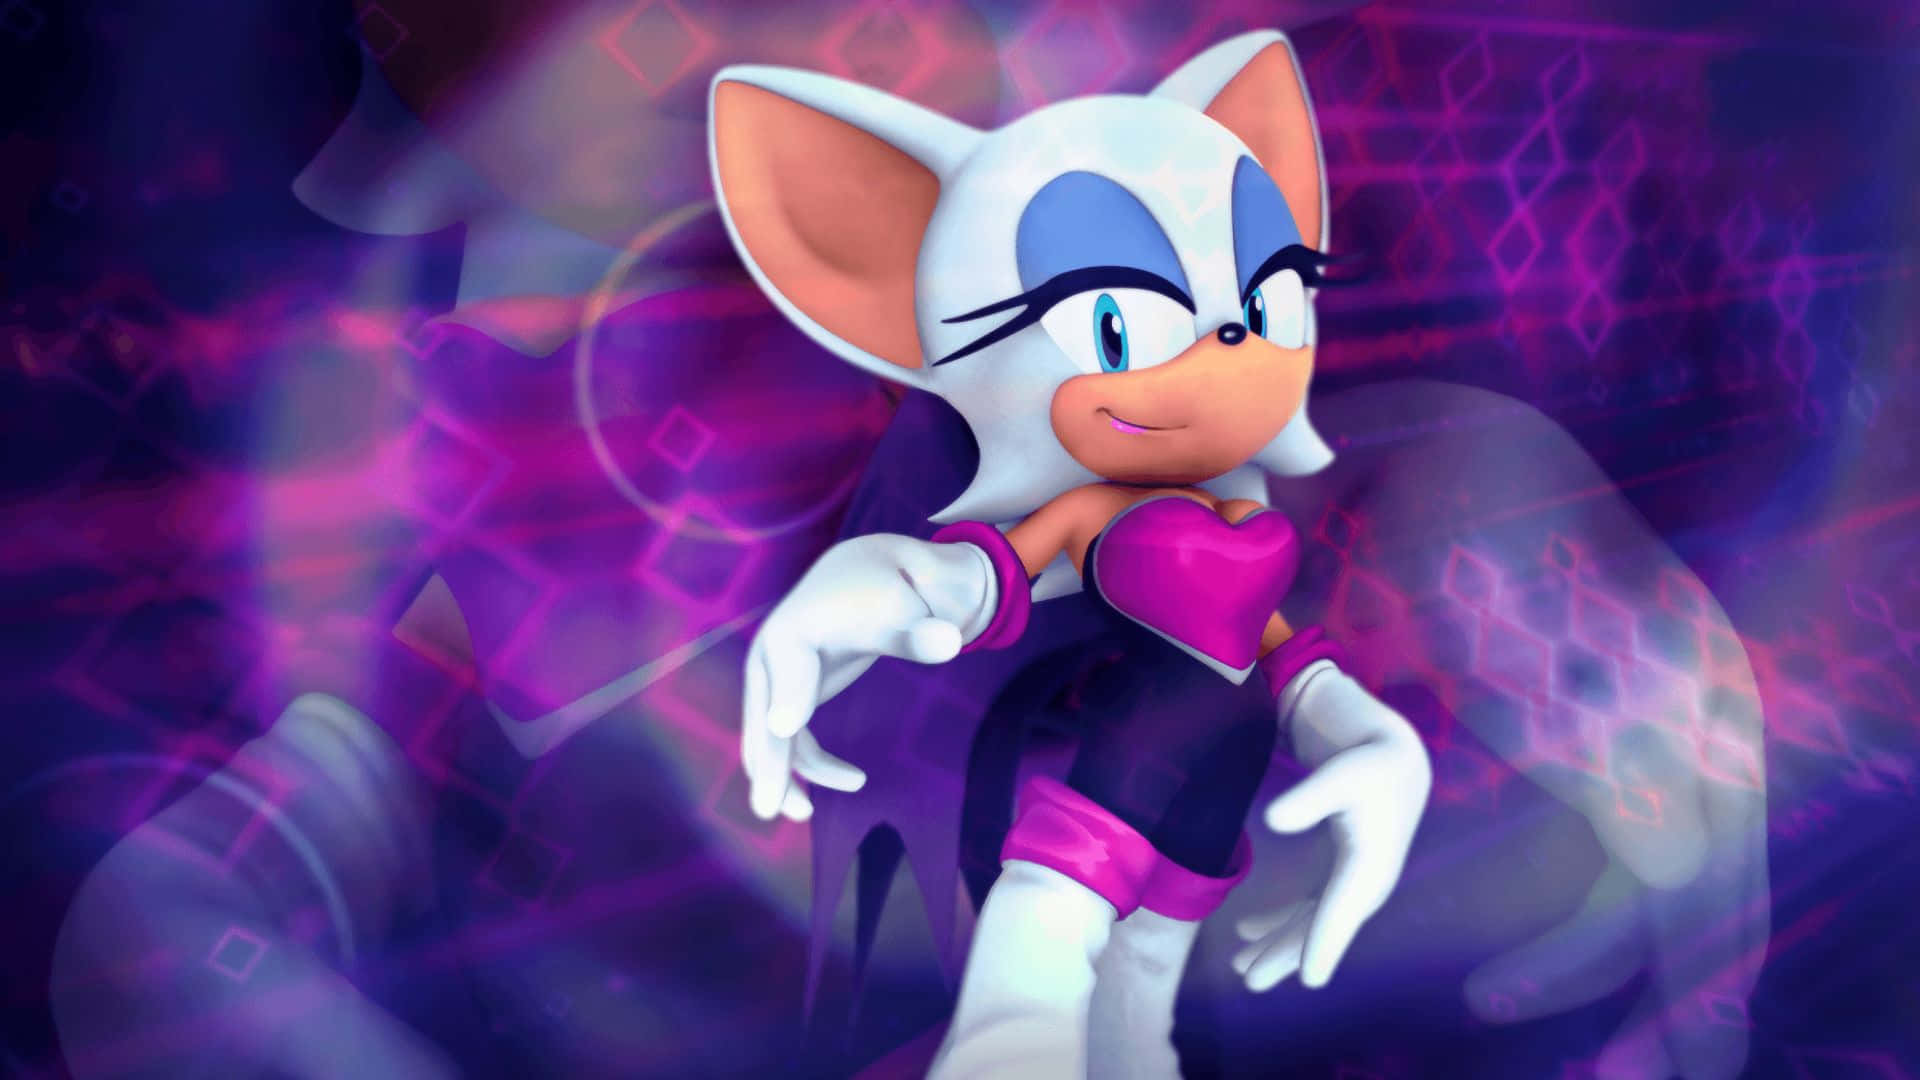 Thrilling Rouge The Bat in Action Wallpaper